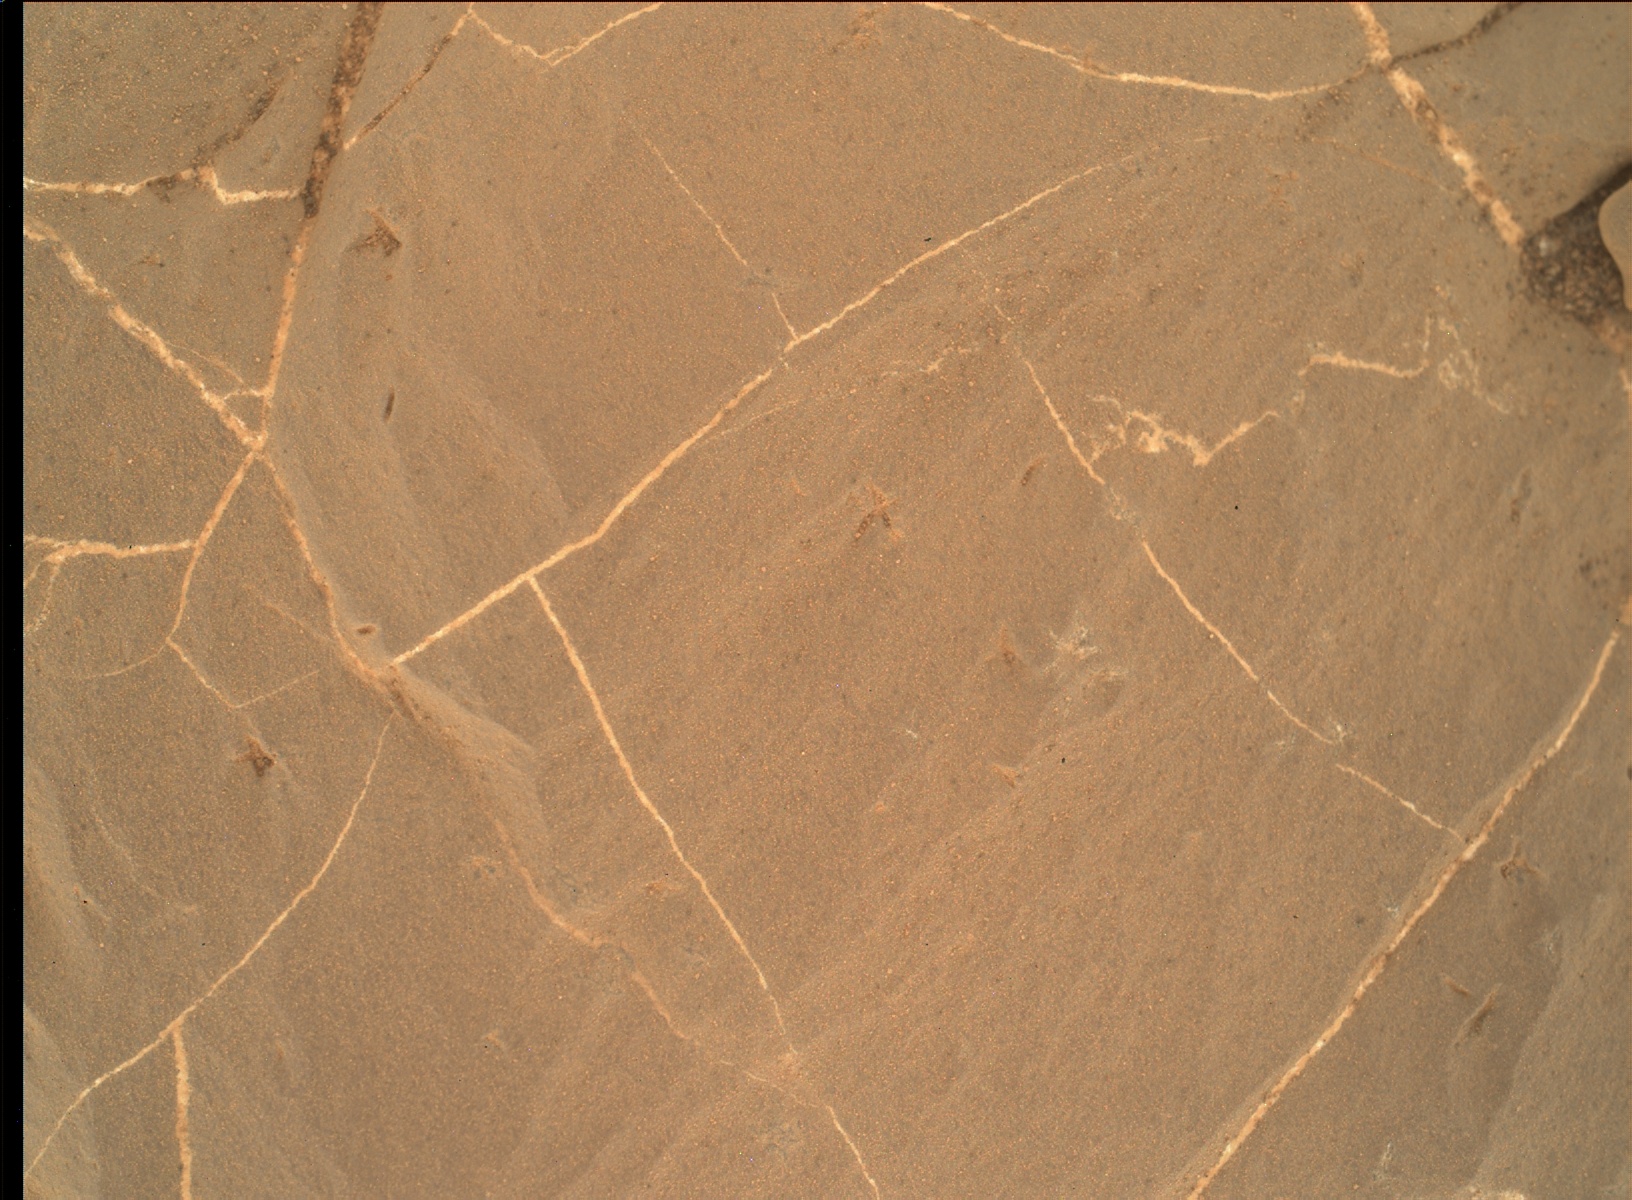 Nasa's Mars rover Curiosity acquired this image using its Mars Hand Lens Imager (MAHLI) on Sol 1993